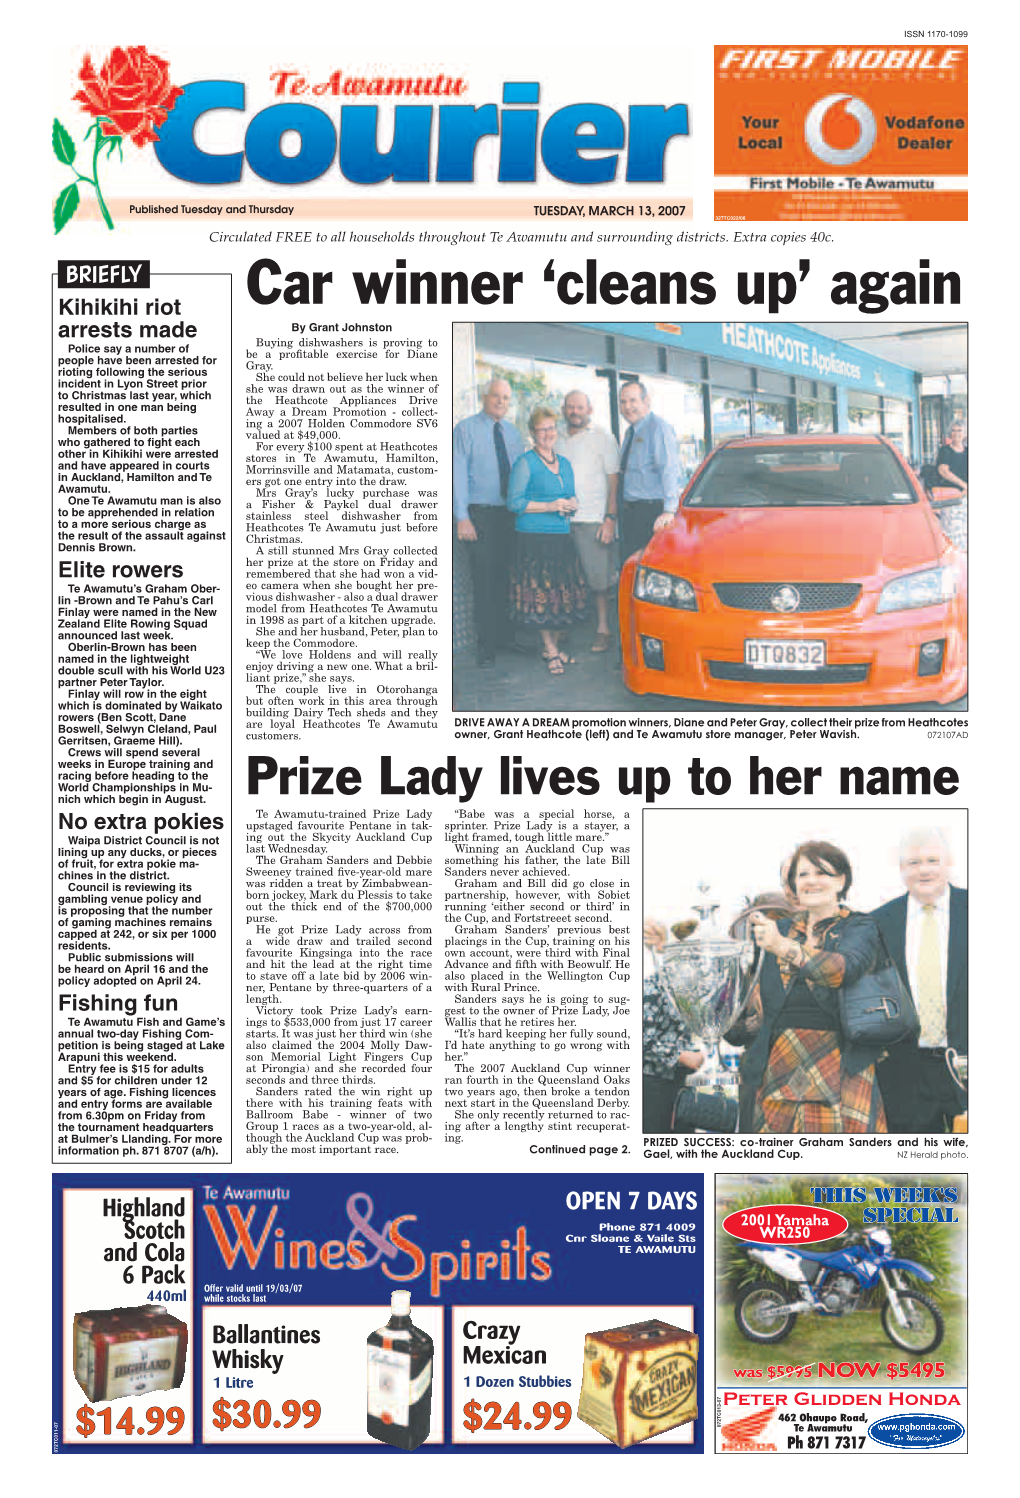 Te Awamutu Courier, Tuesday, March 13, 2007 Cinematic Passion Lives on at Regent